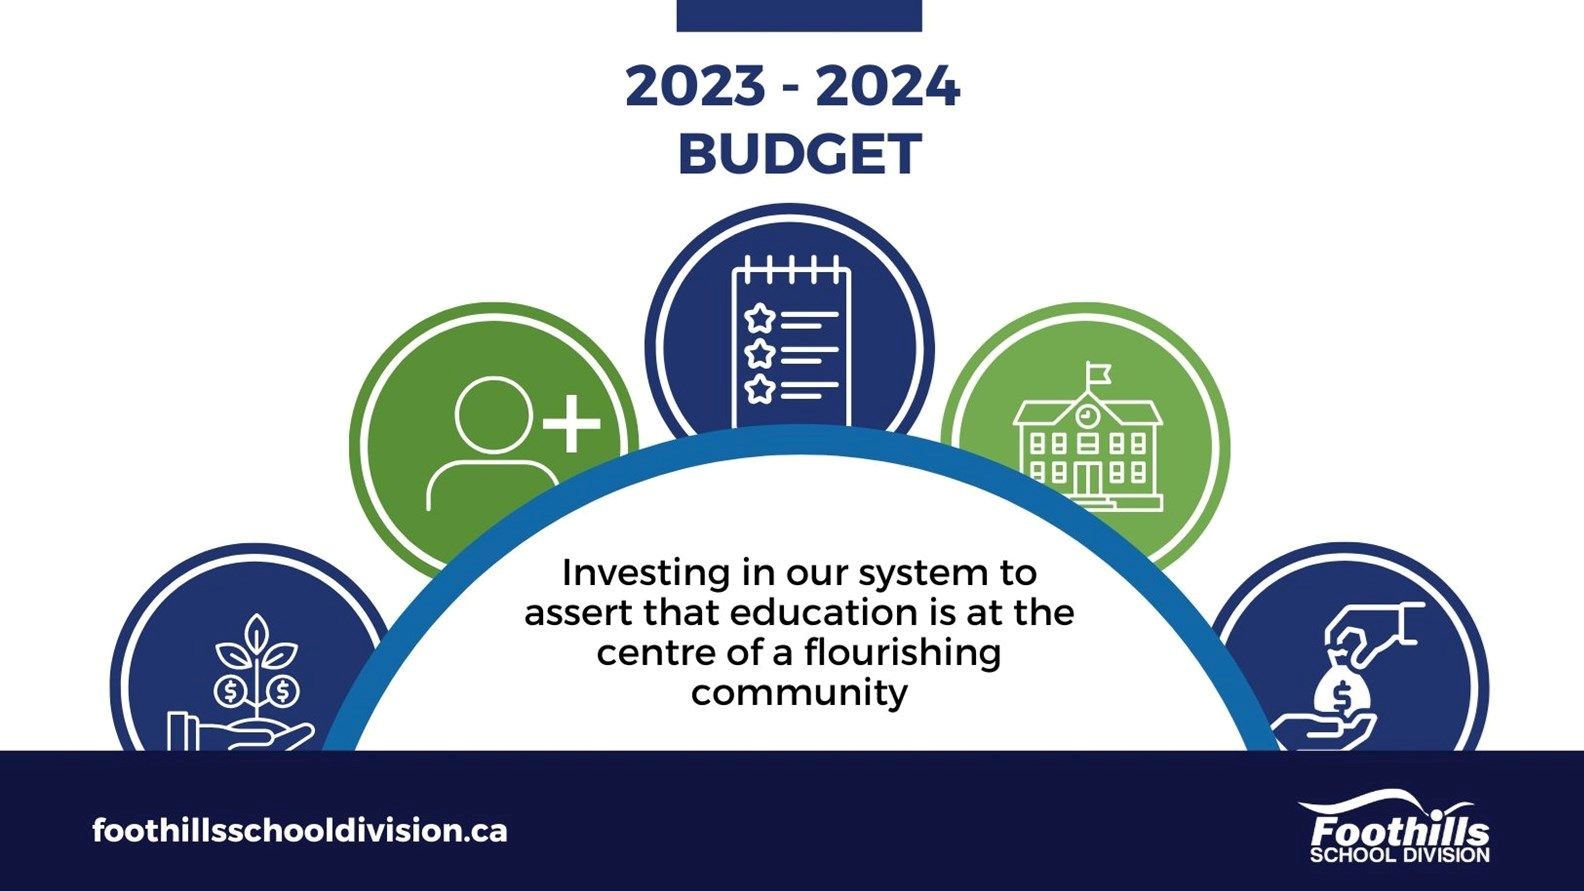 Foothills School Division 2023-2024 Budget